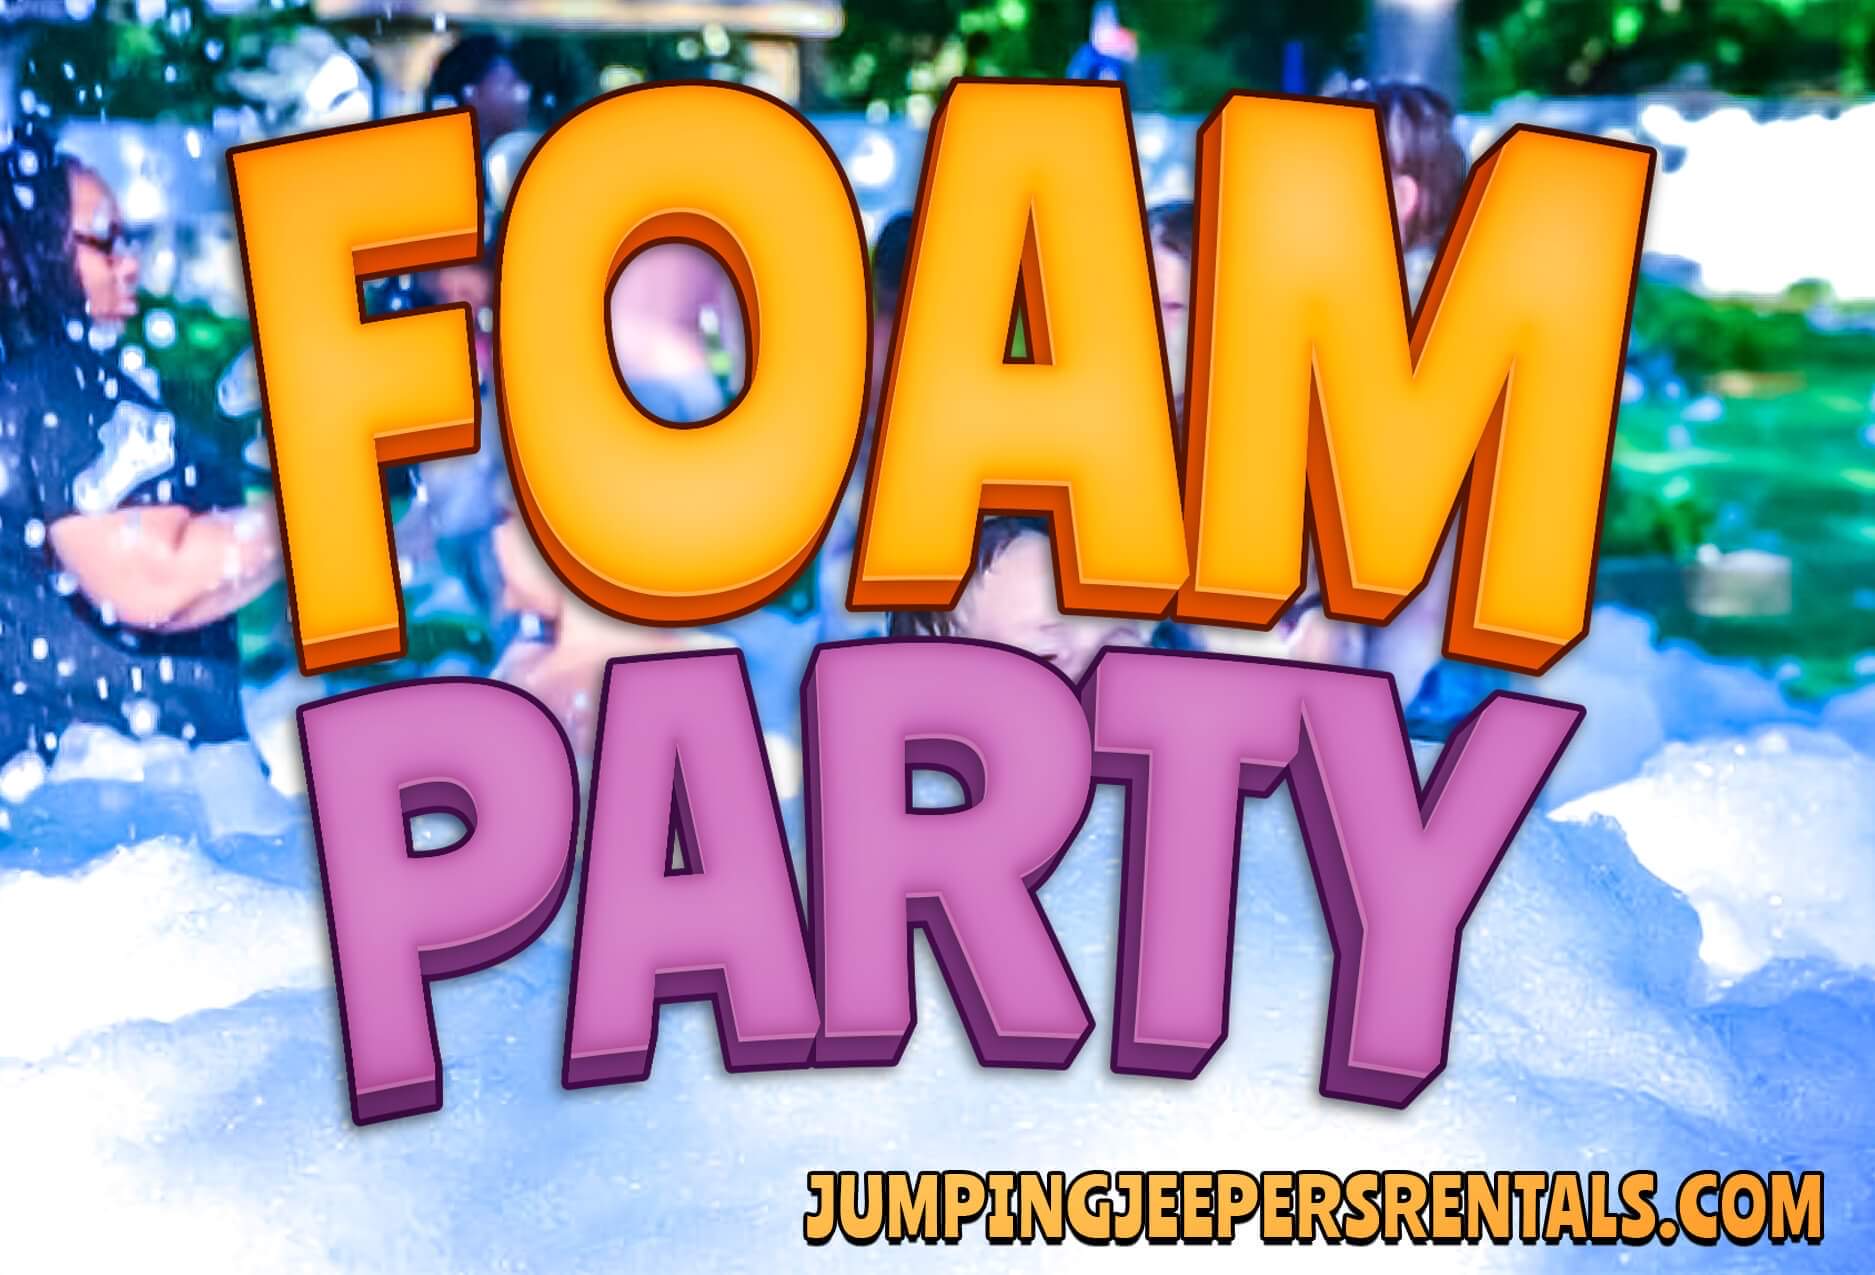 Foam Party Experience: The Ultimate Party Experience